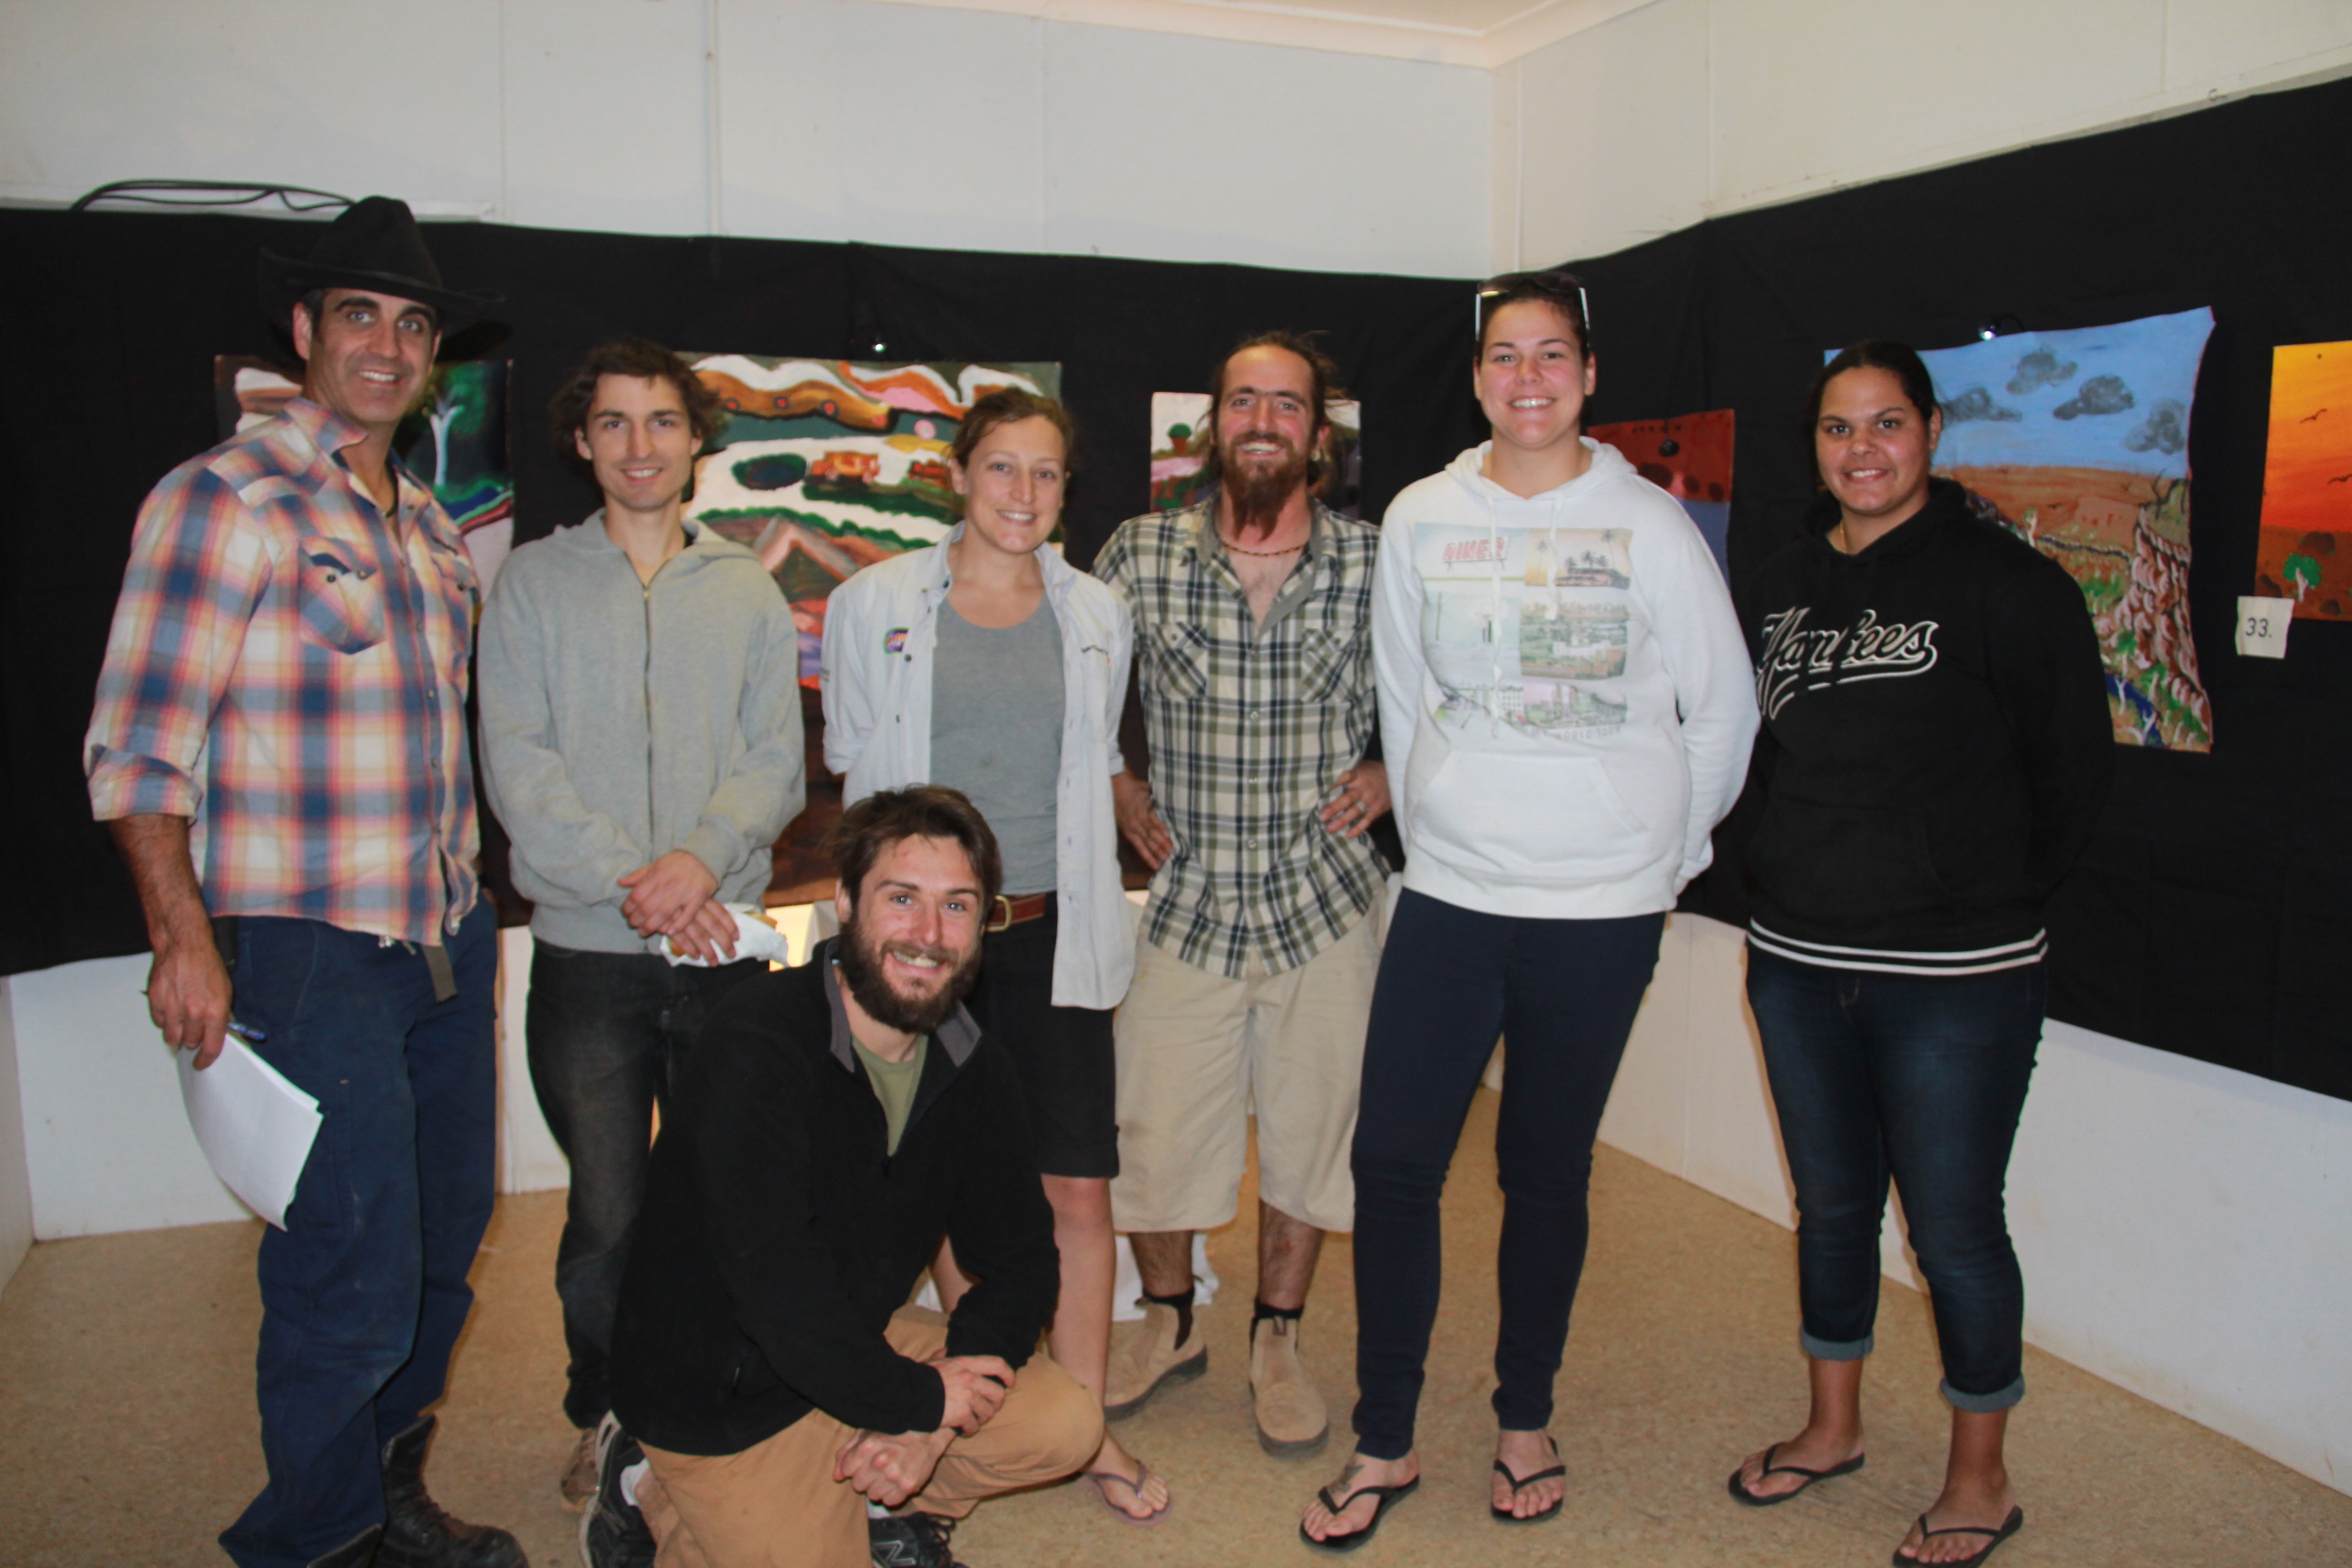 Exhibition Visitors. From to left to right: Damien Thornber, Carlo McAbee, Emily Minchin, Leo Ollivier, Ebony Humble, Larissa Bennell & Josh McHale (at front) - The Desert Feet Tour and Ngurra Kujunka mob enjoying the vibe at the exhibition